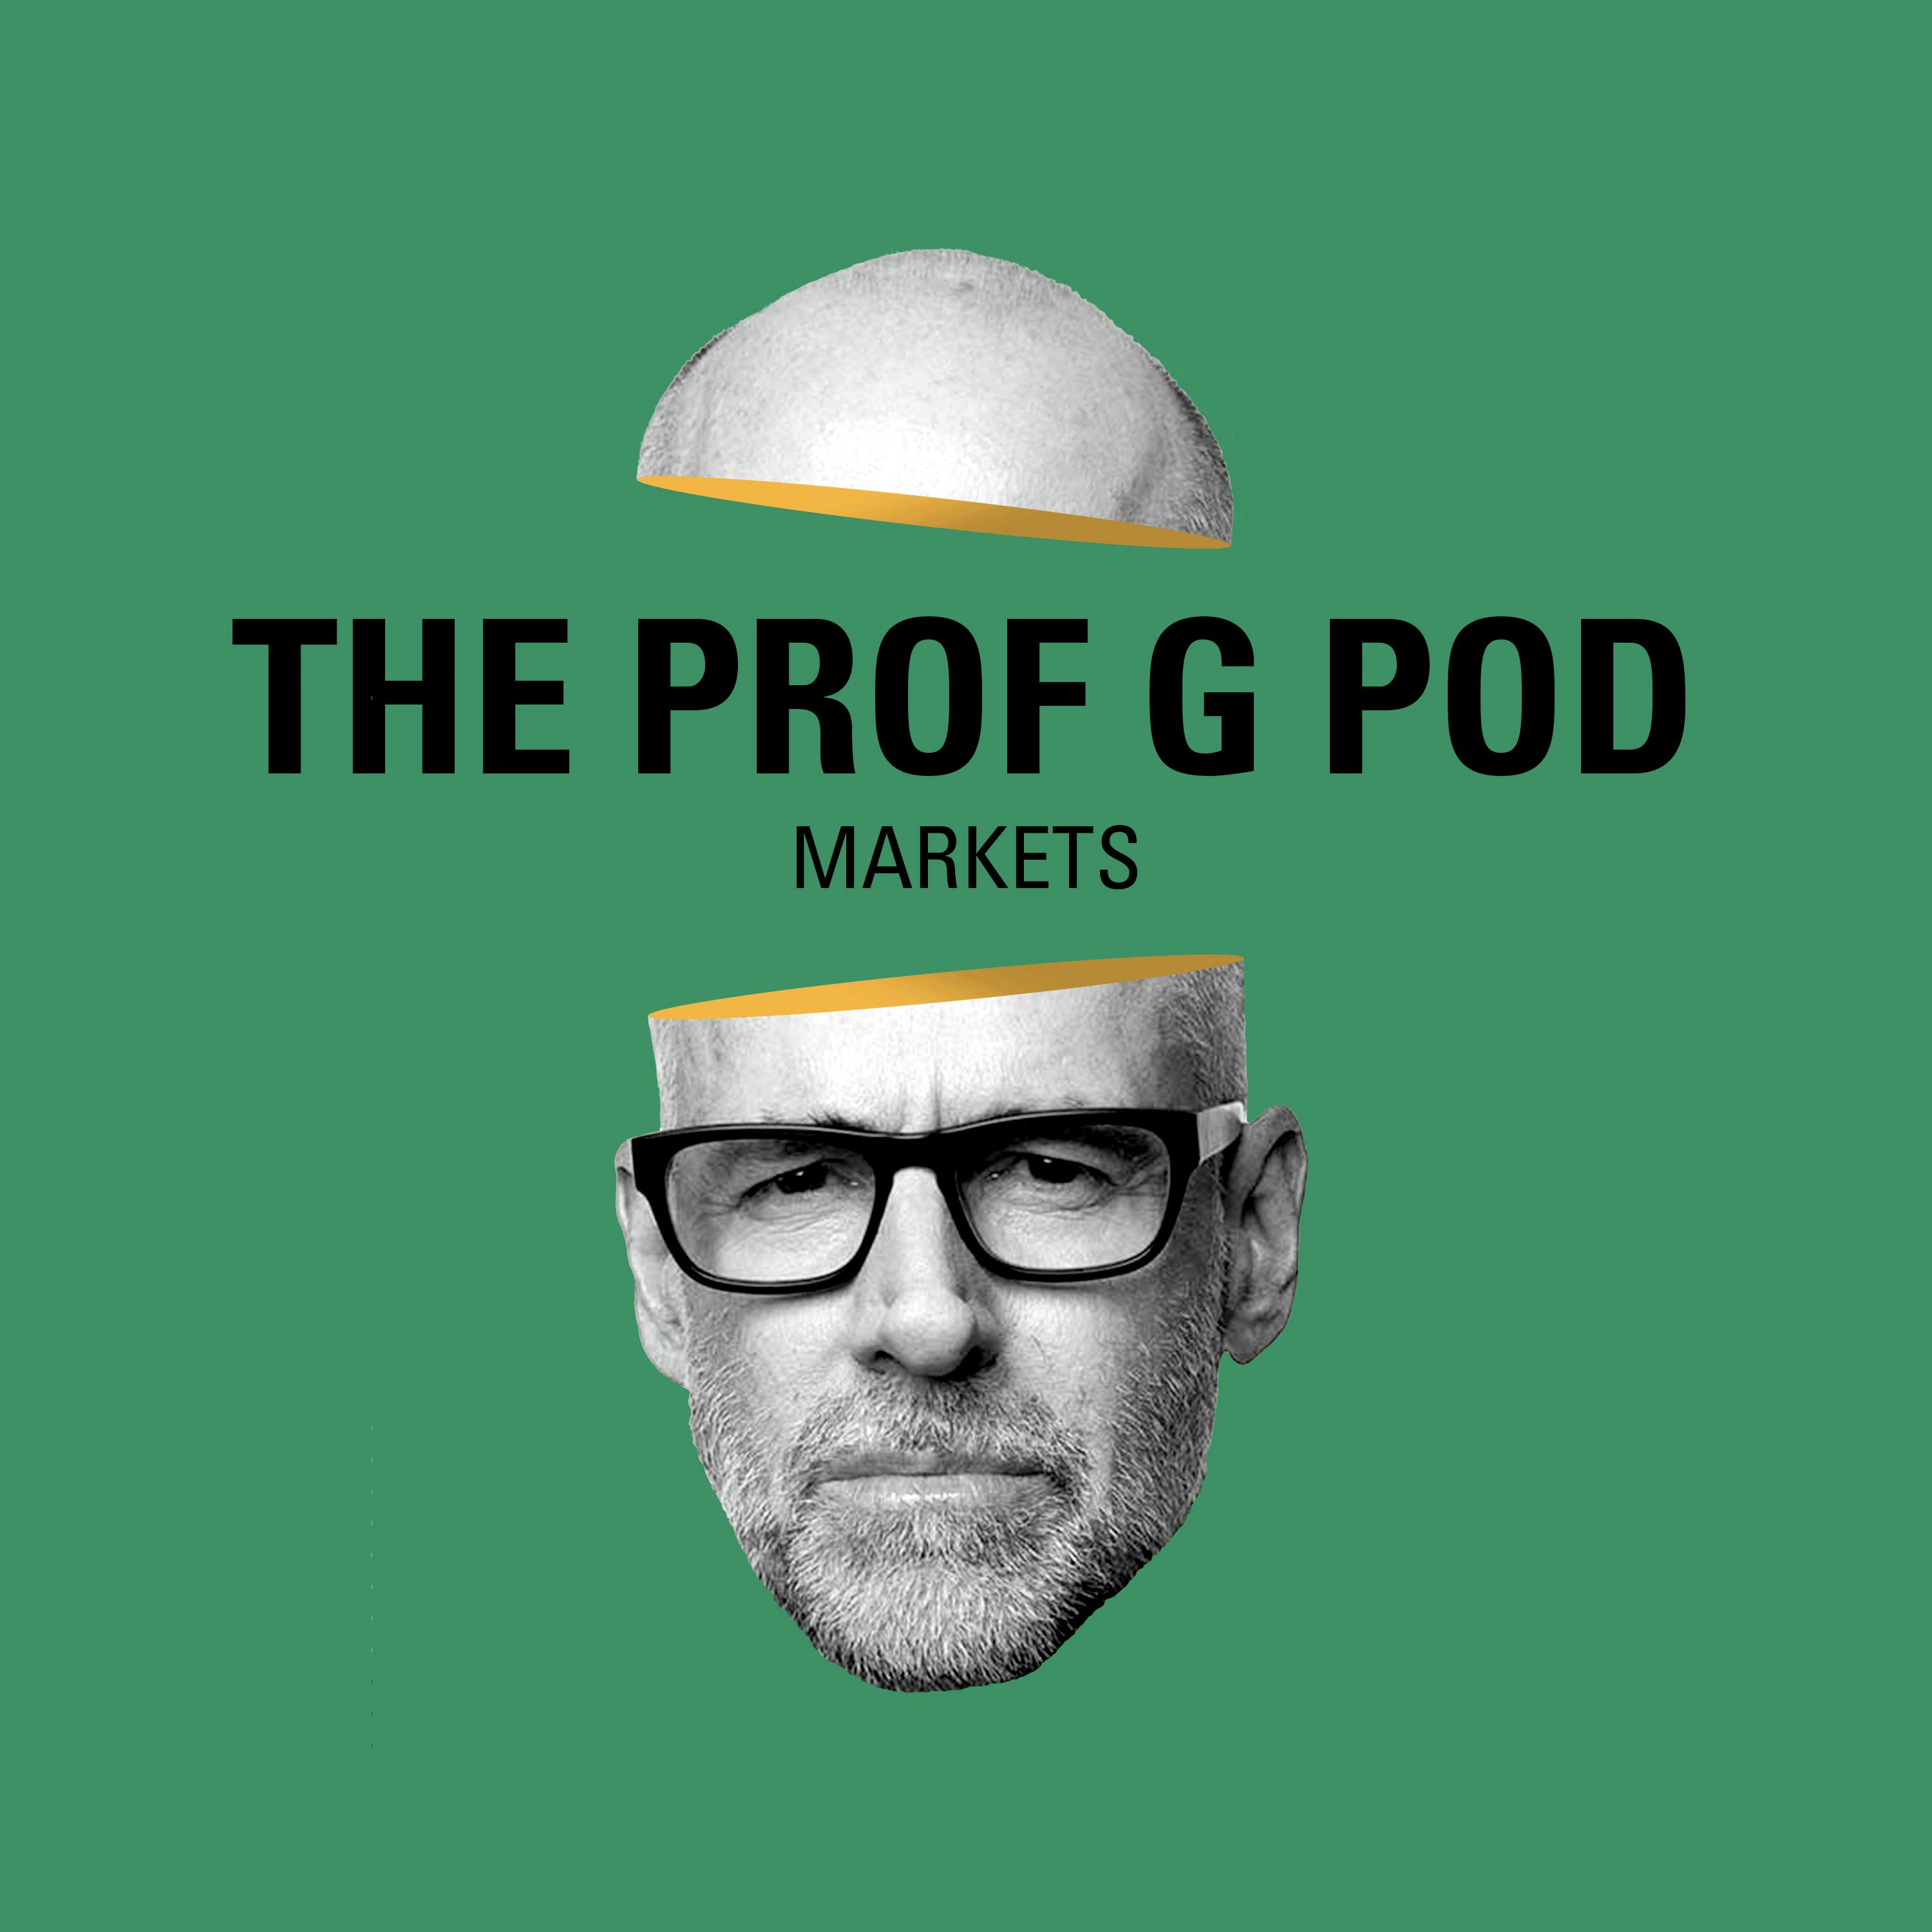 Prof G Markets: The Ethereum Merge, Porsche’s IPO, and Dividends